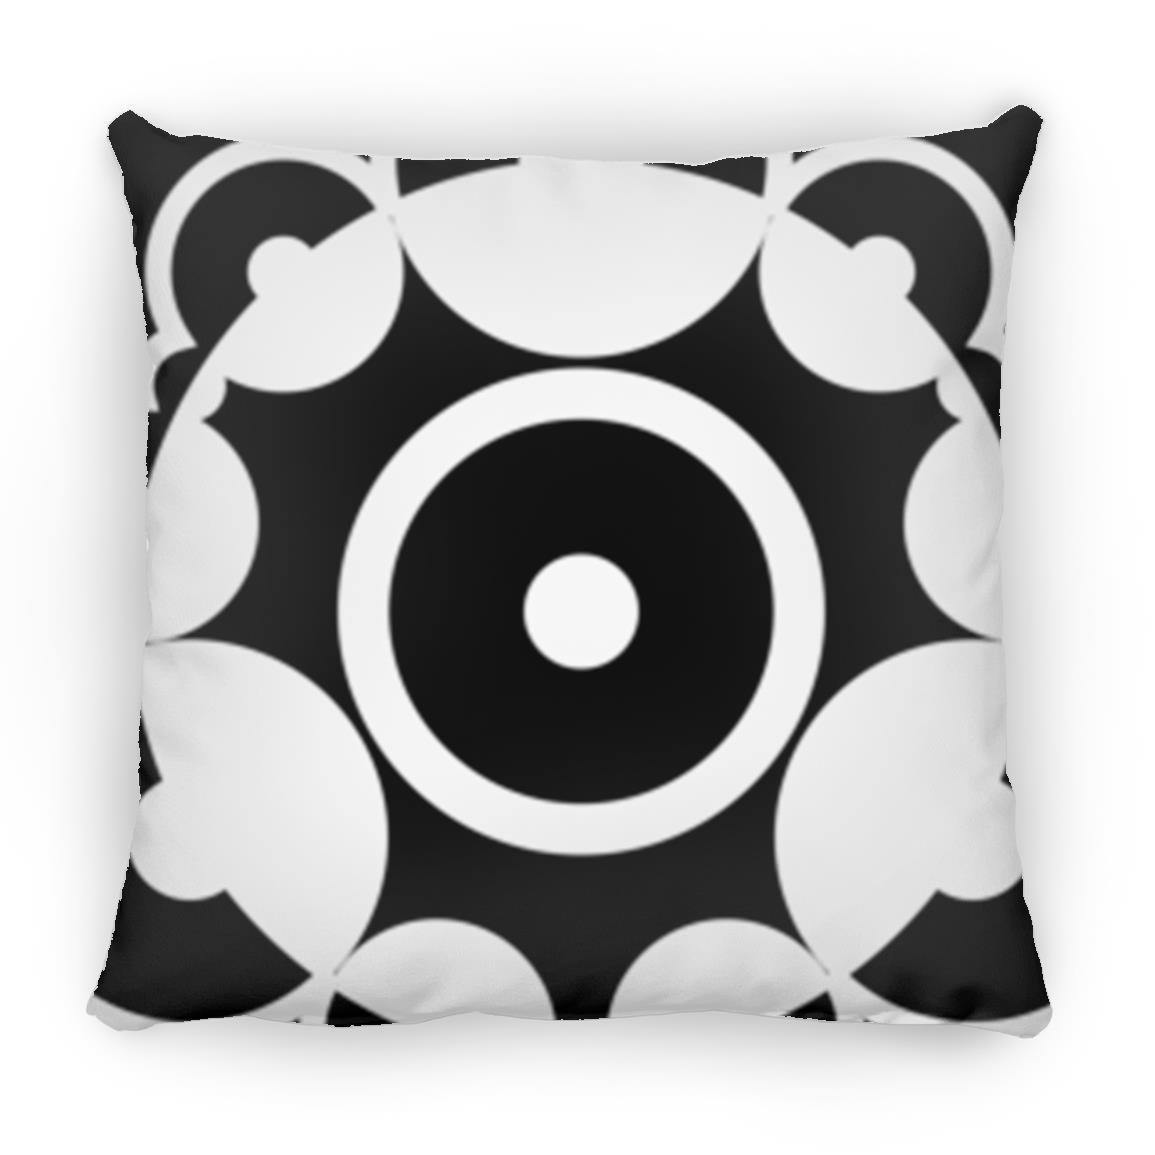 Crop Circle Pillow - Clanfield - Shapes of Wisdom